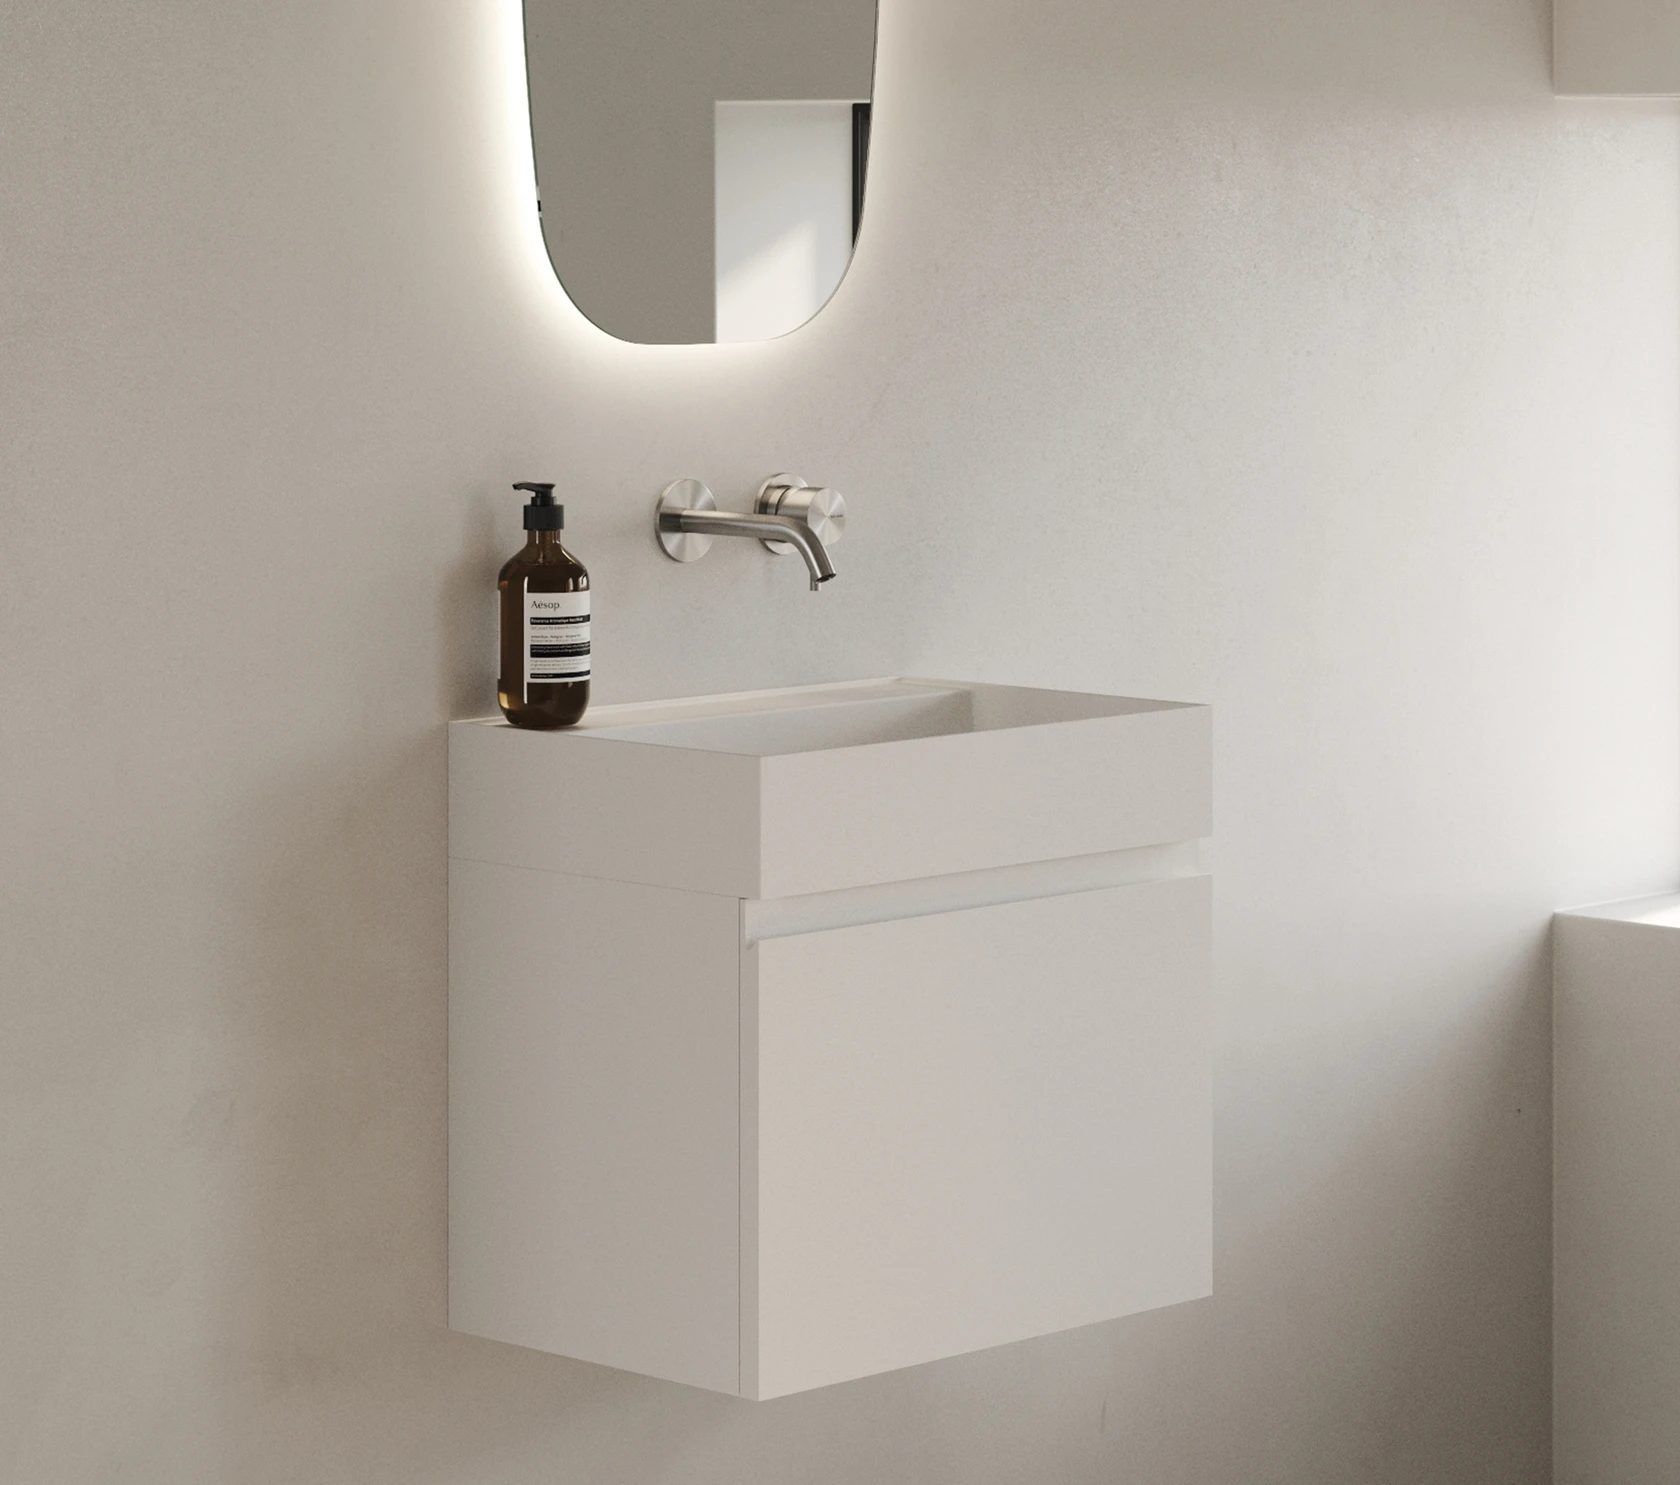 Hudson wall vallone wall-mounted sink editorial image slider II